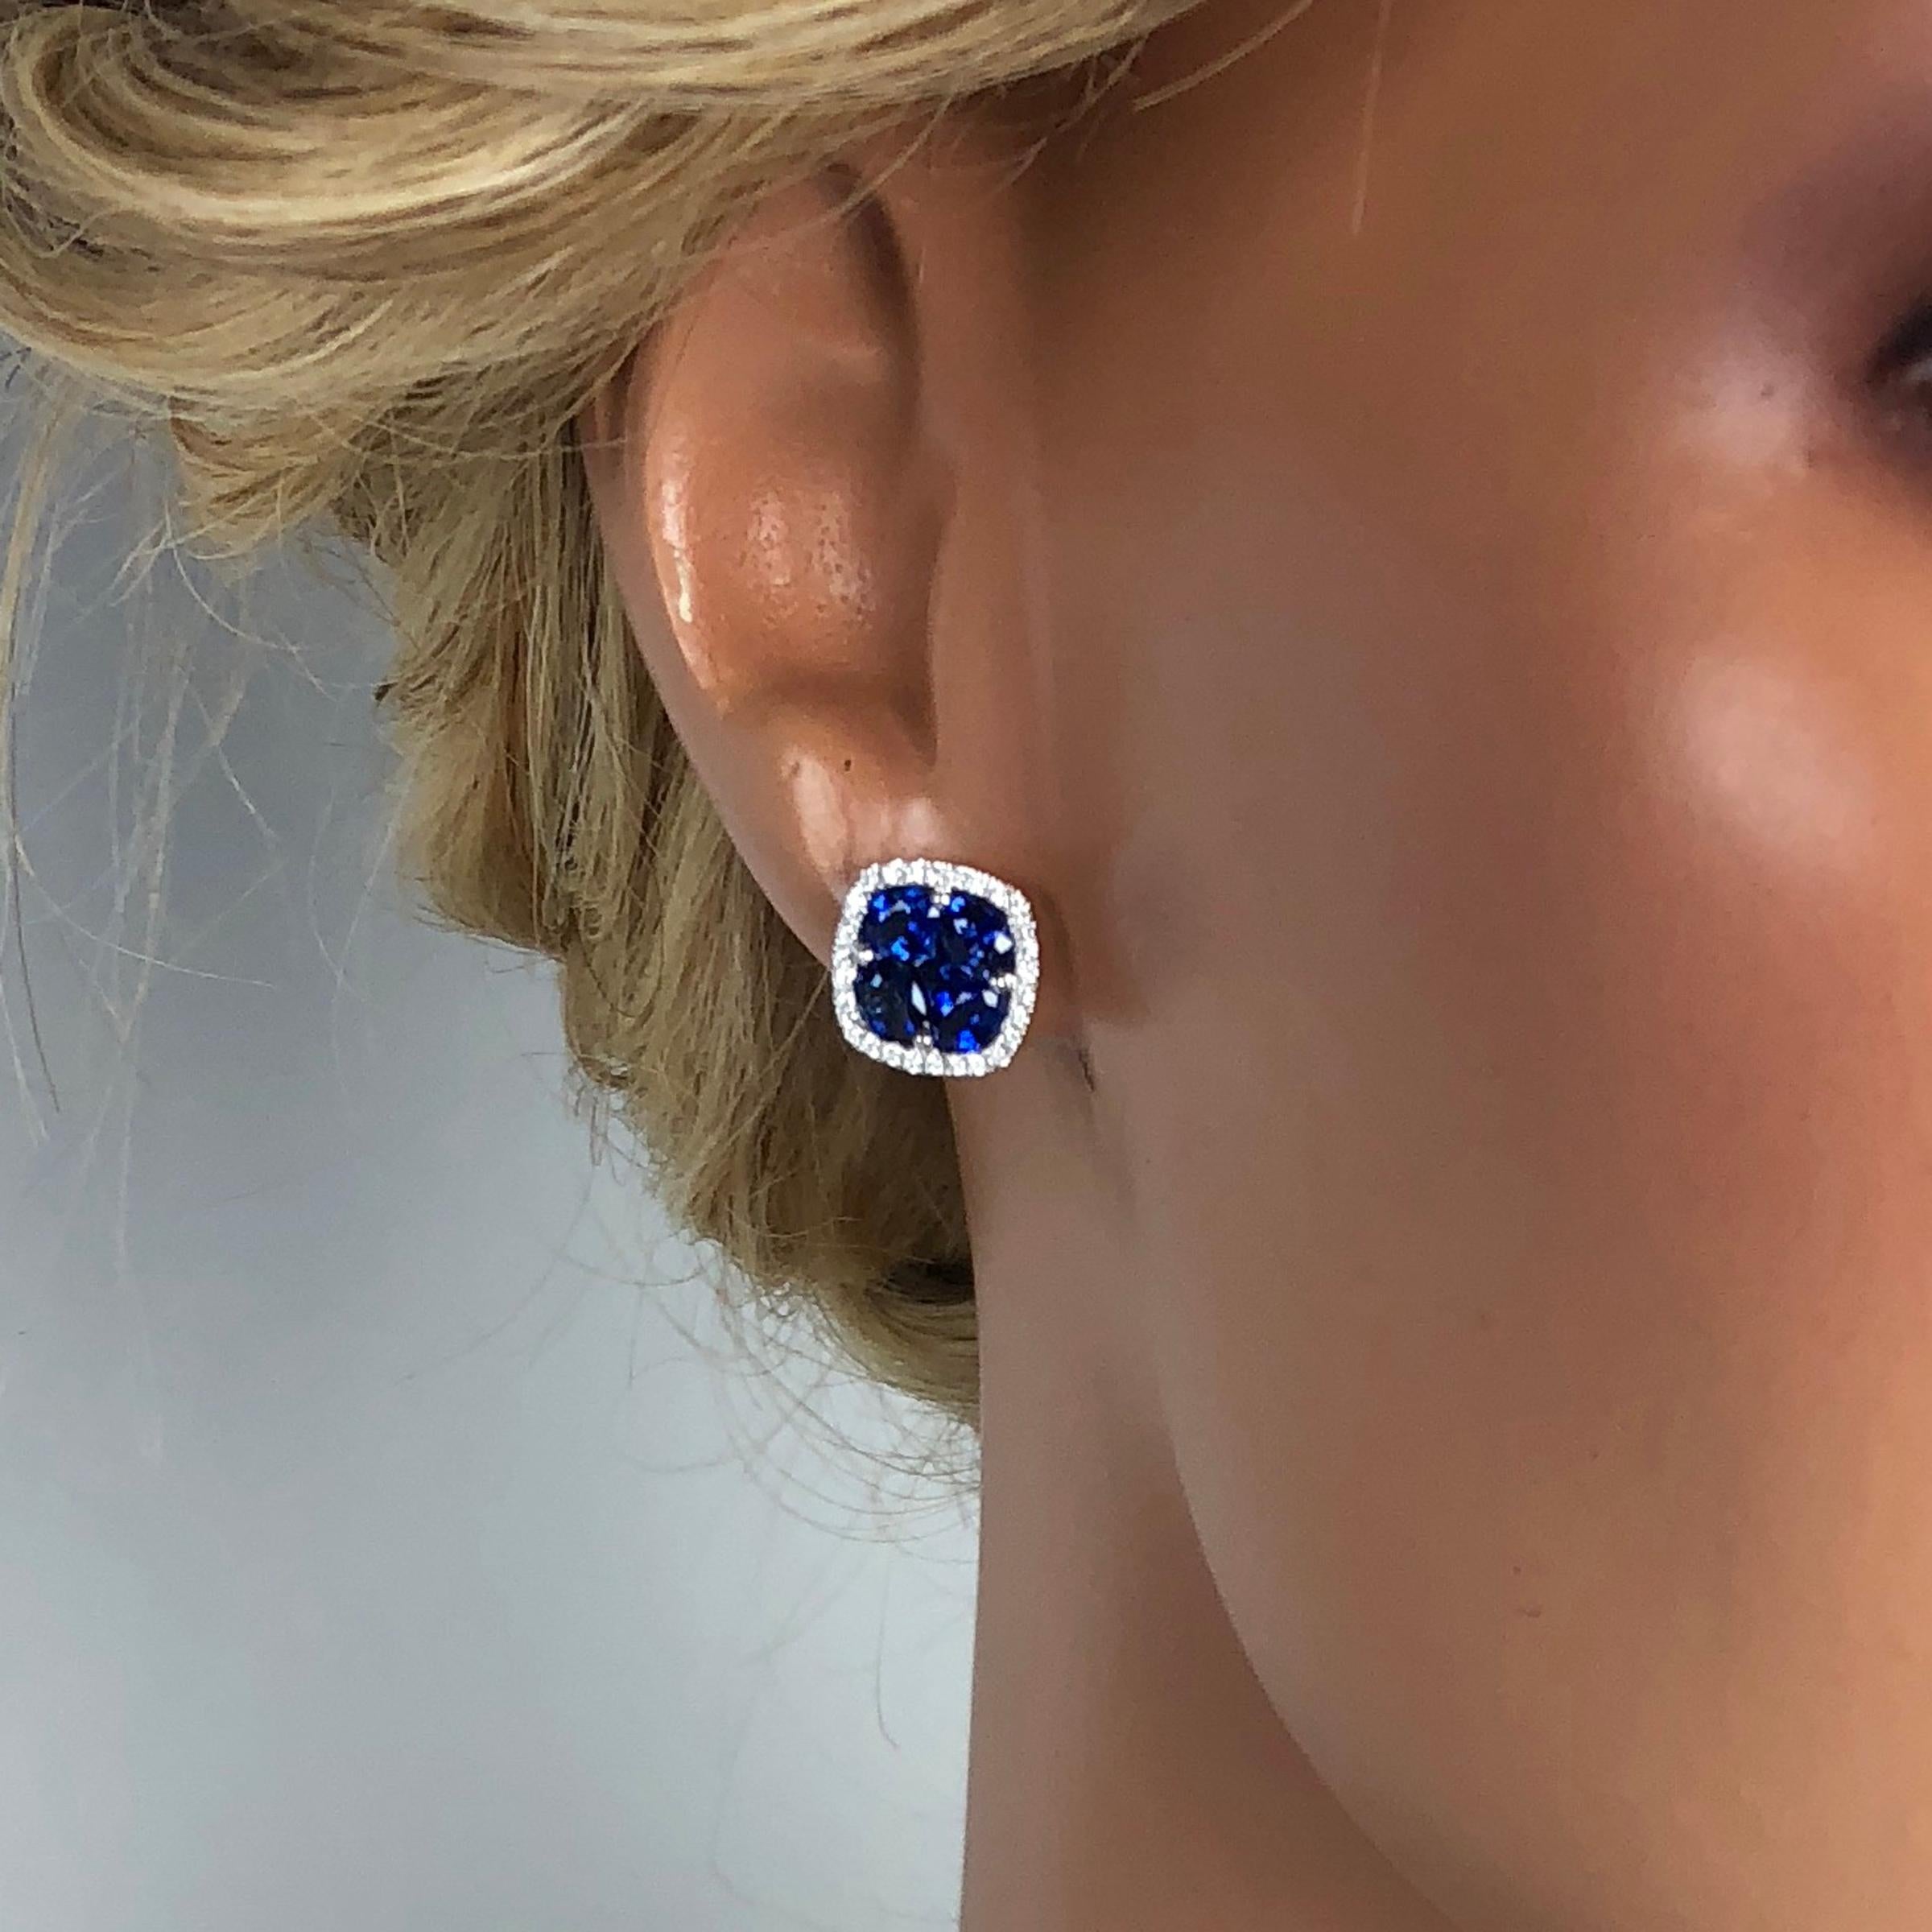 Contemporary 2.6 Carat Sapphire and 0.21 Carat Diamond Stud Earrings in 18W Gold ref1678 For Sale